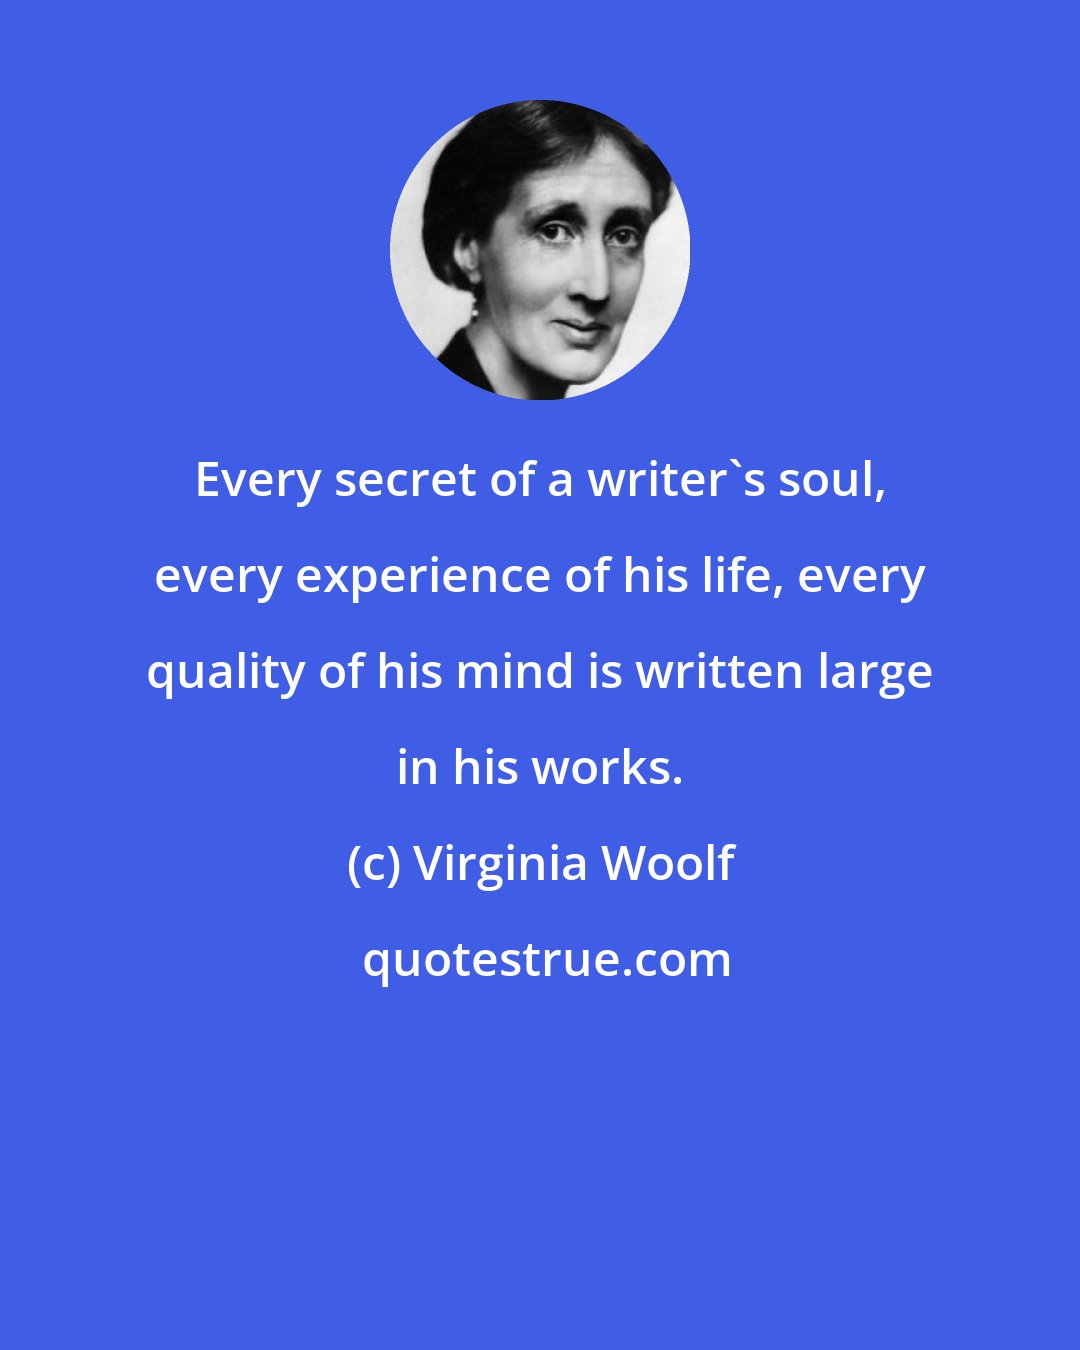 Virginia Woolf: Every secret of a writer's soul, every experience of his life, every quality of his mind is written large in his works.